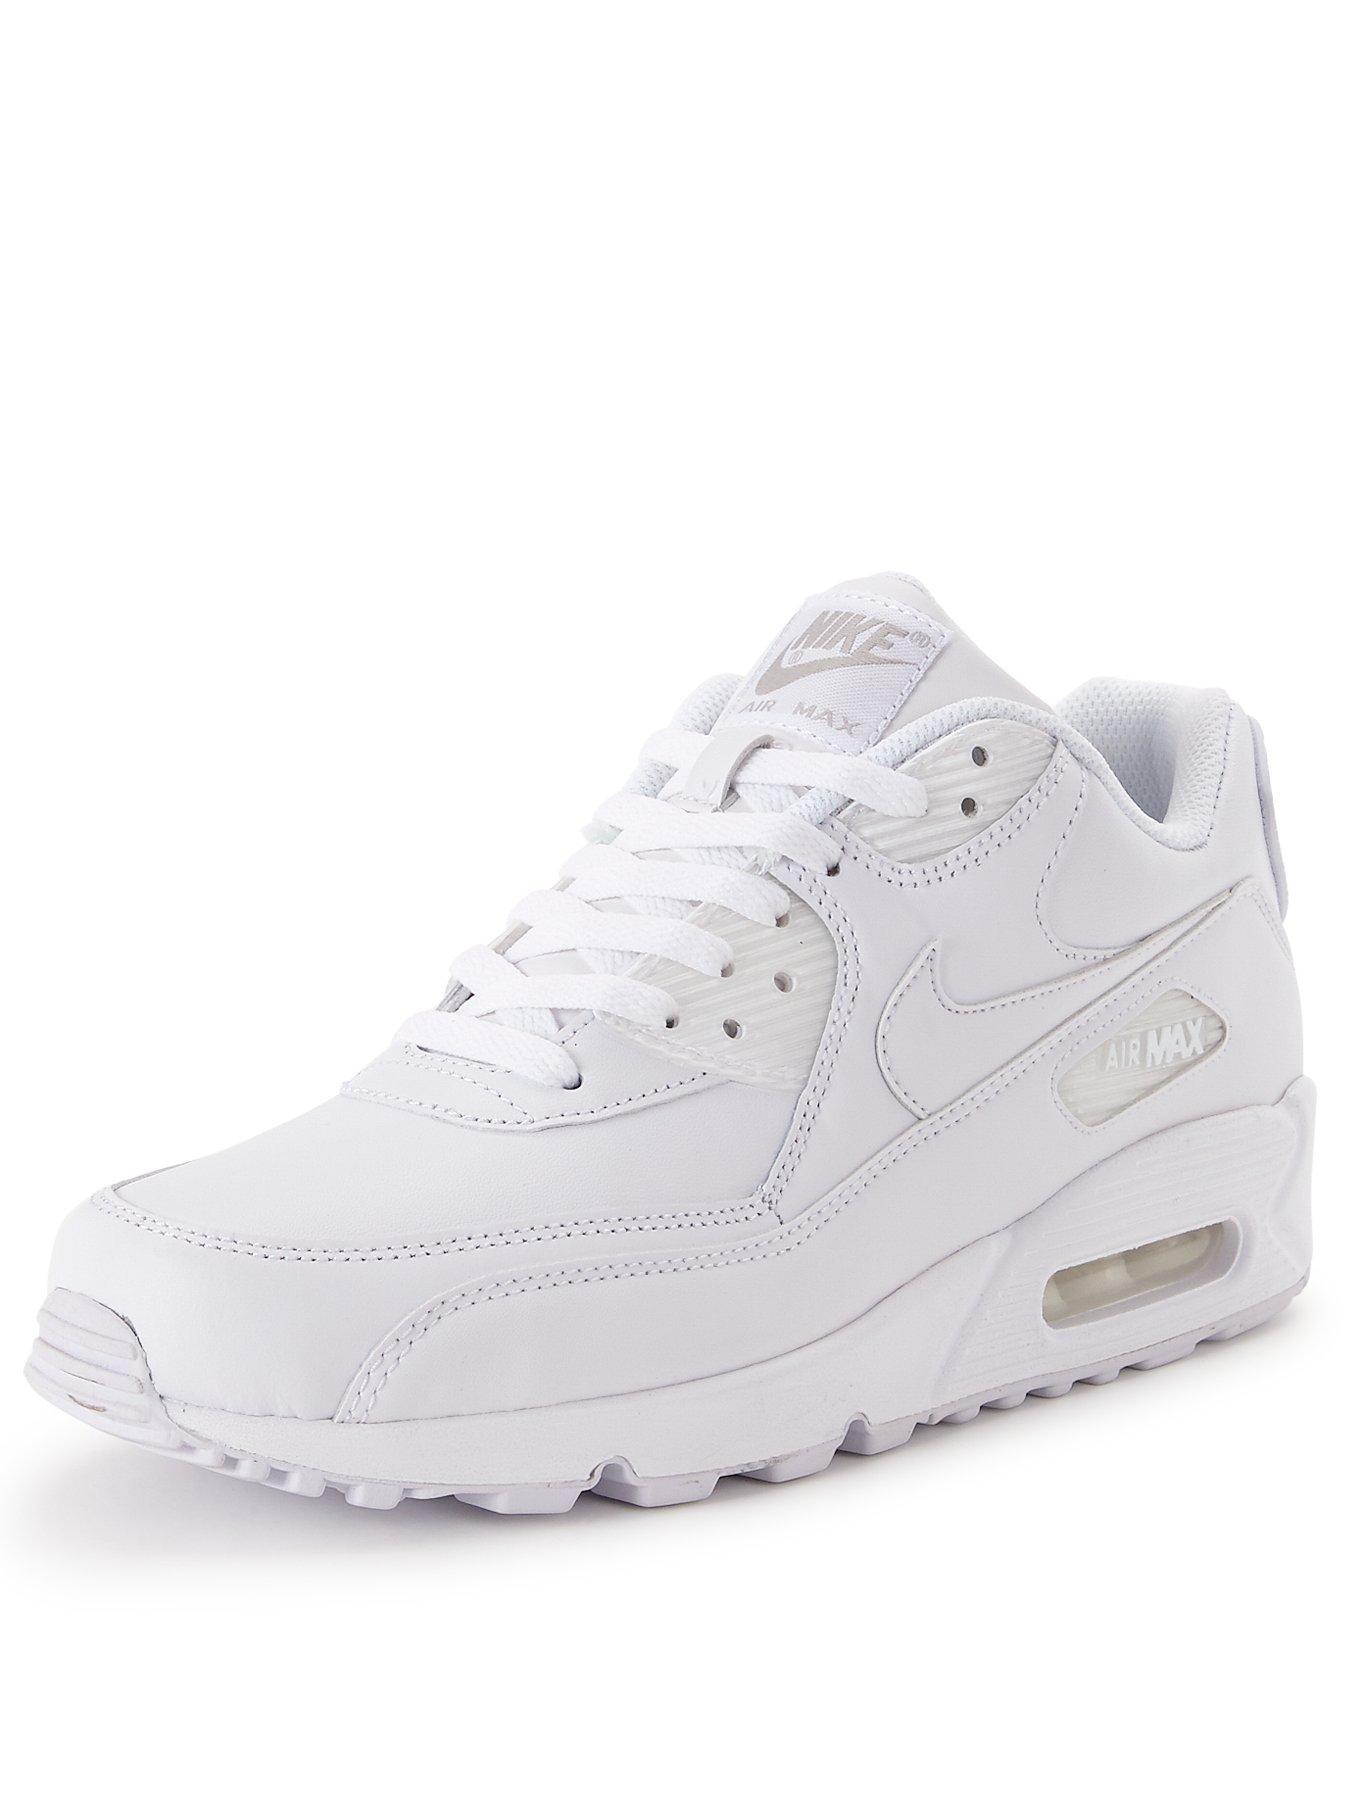 nike air max 90 mens all leather